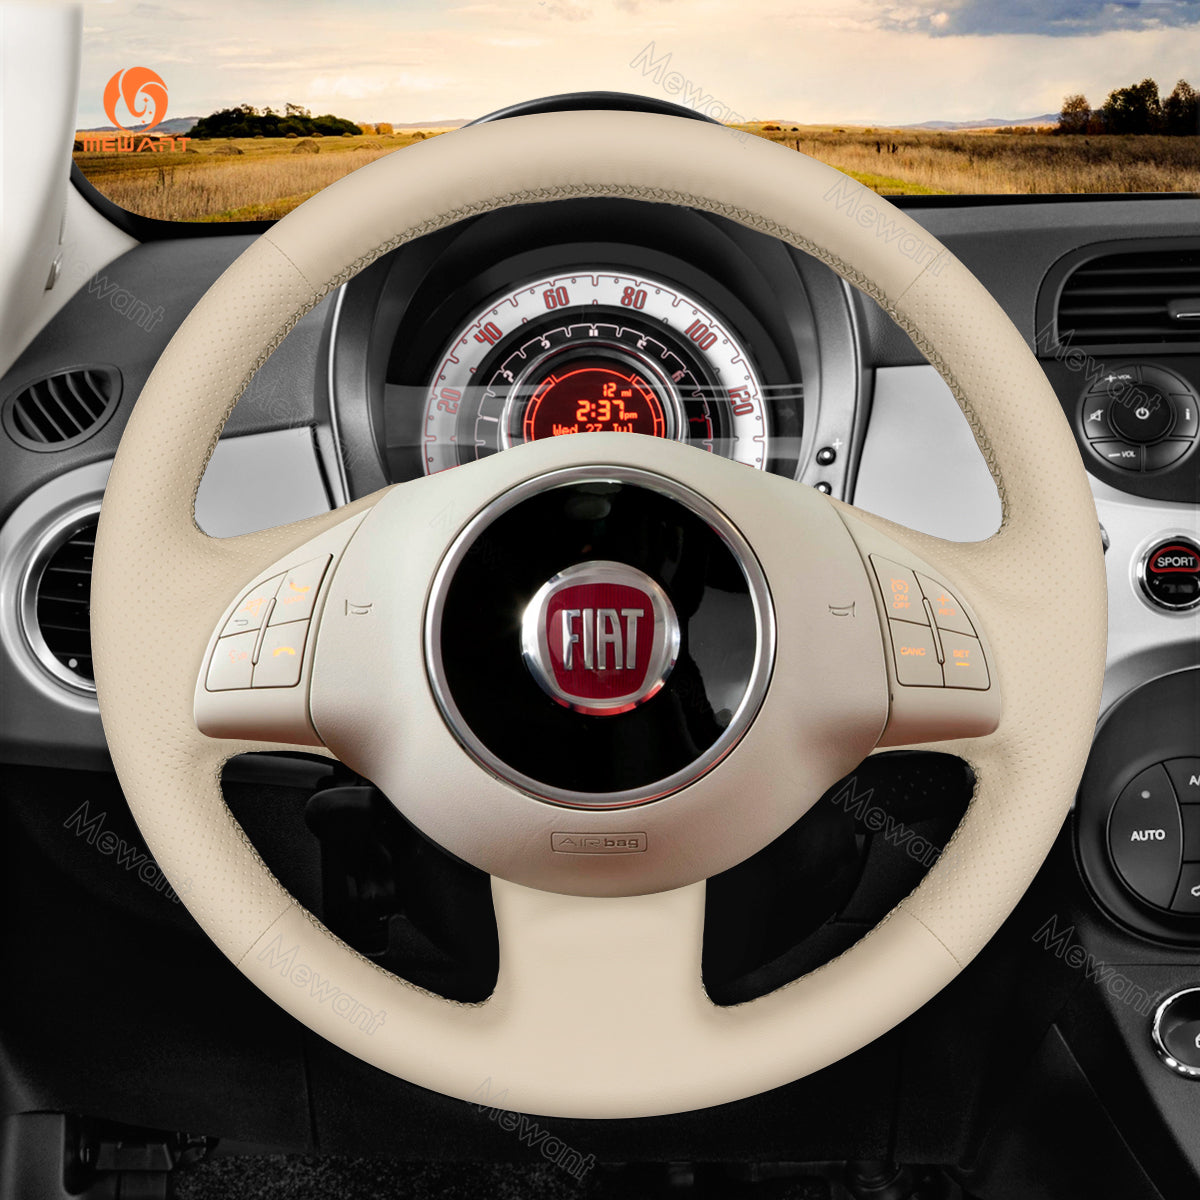 MEWANT Car Steering Wheel Cover for Fiat 500 2007-2015 / Fiat 500e 2014-2018 / Fiat 500C 2014-2017